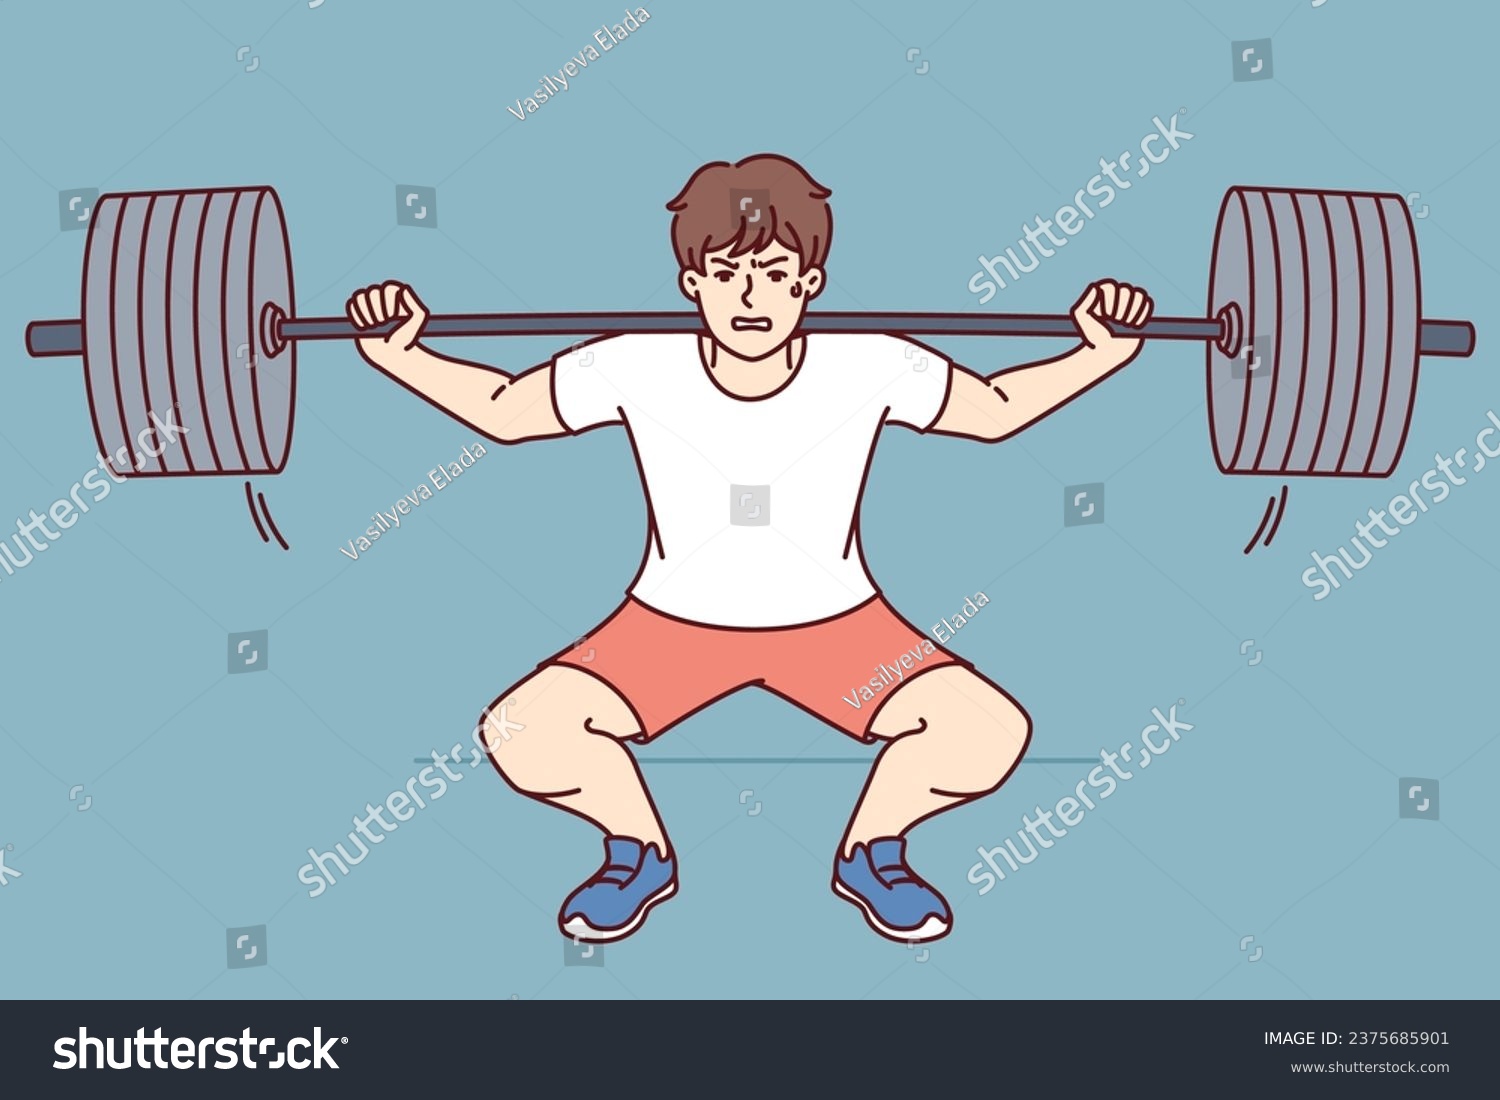 SVG of Man squats with barbell on shoulders, doing weightlifting in gym and trying to set new sports record. Guy wants to become professional bodybuilder lifts barbell to build muscle and succeed in fitness svg